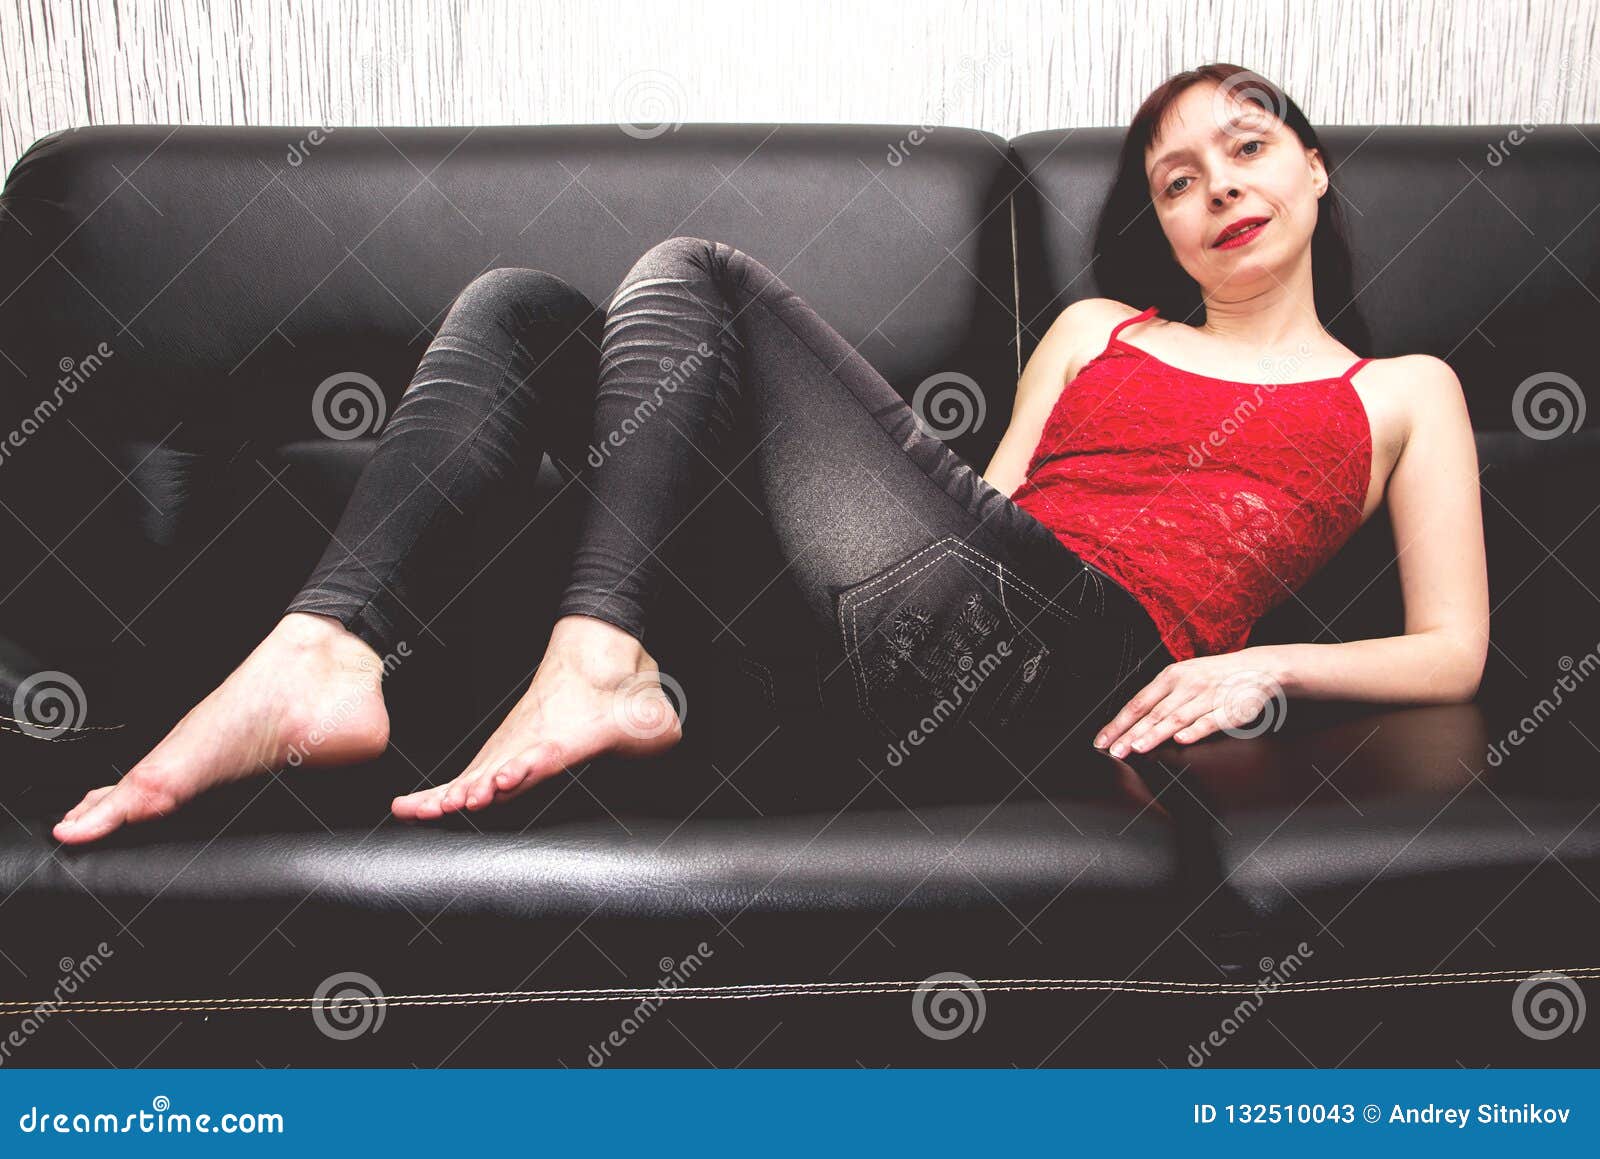 Beautiful Woman Resting On The Couch Stock Image Image Of Female